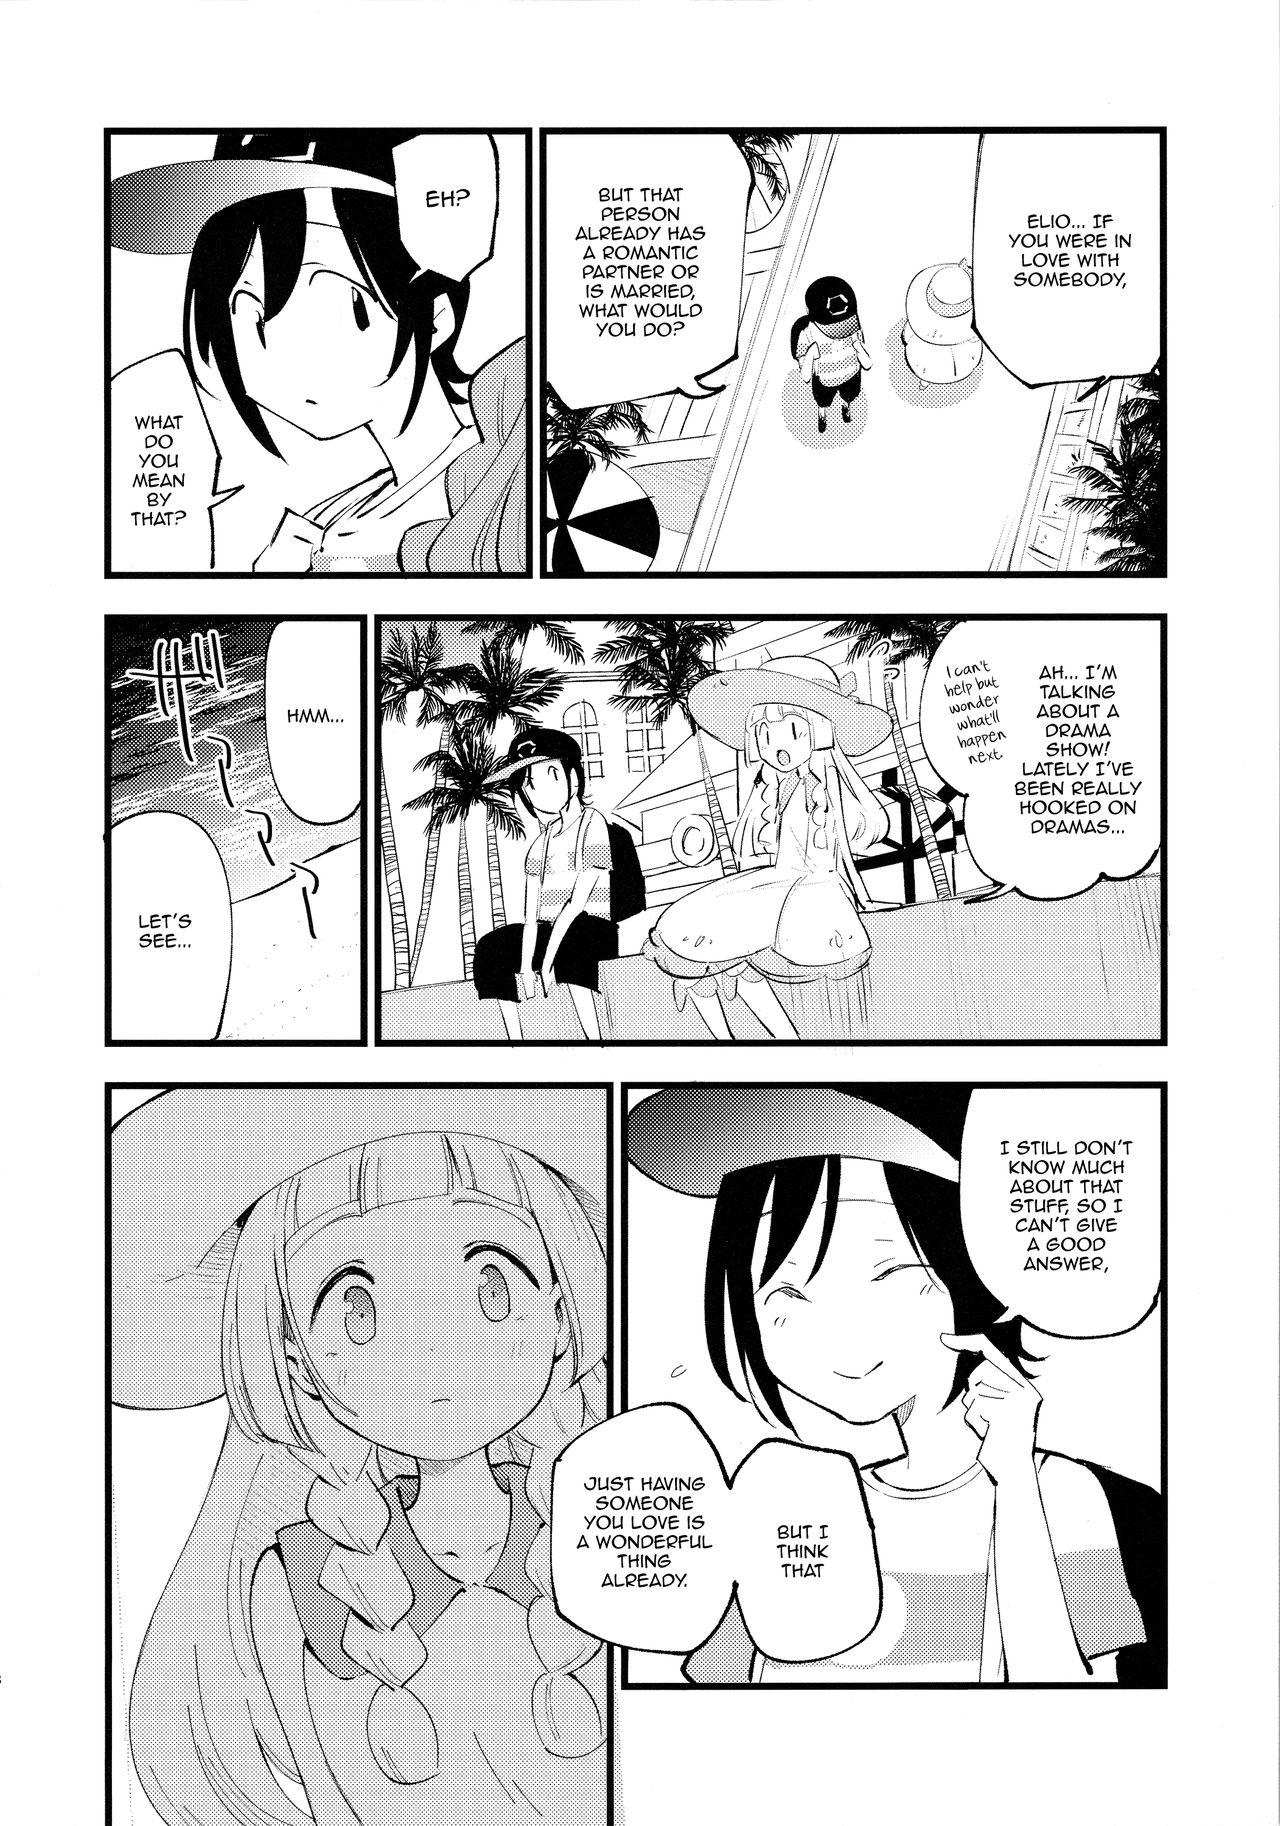 Webcamshow Hakase no Yoru no Joshu. 3 | The Professor's Assistant At Night. 3 - Pokemon | pocket monsters Hot Whores - Page 7